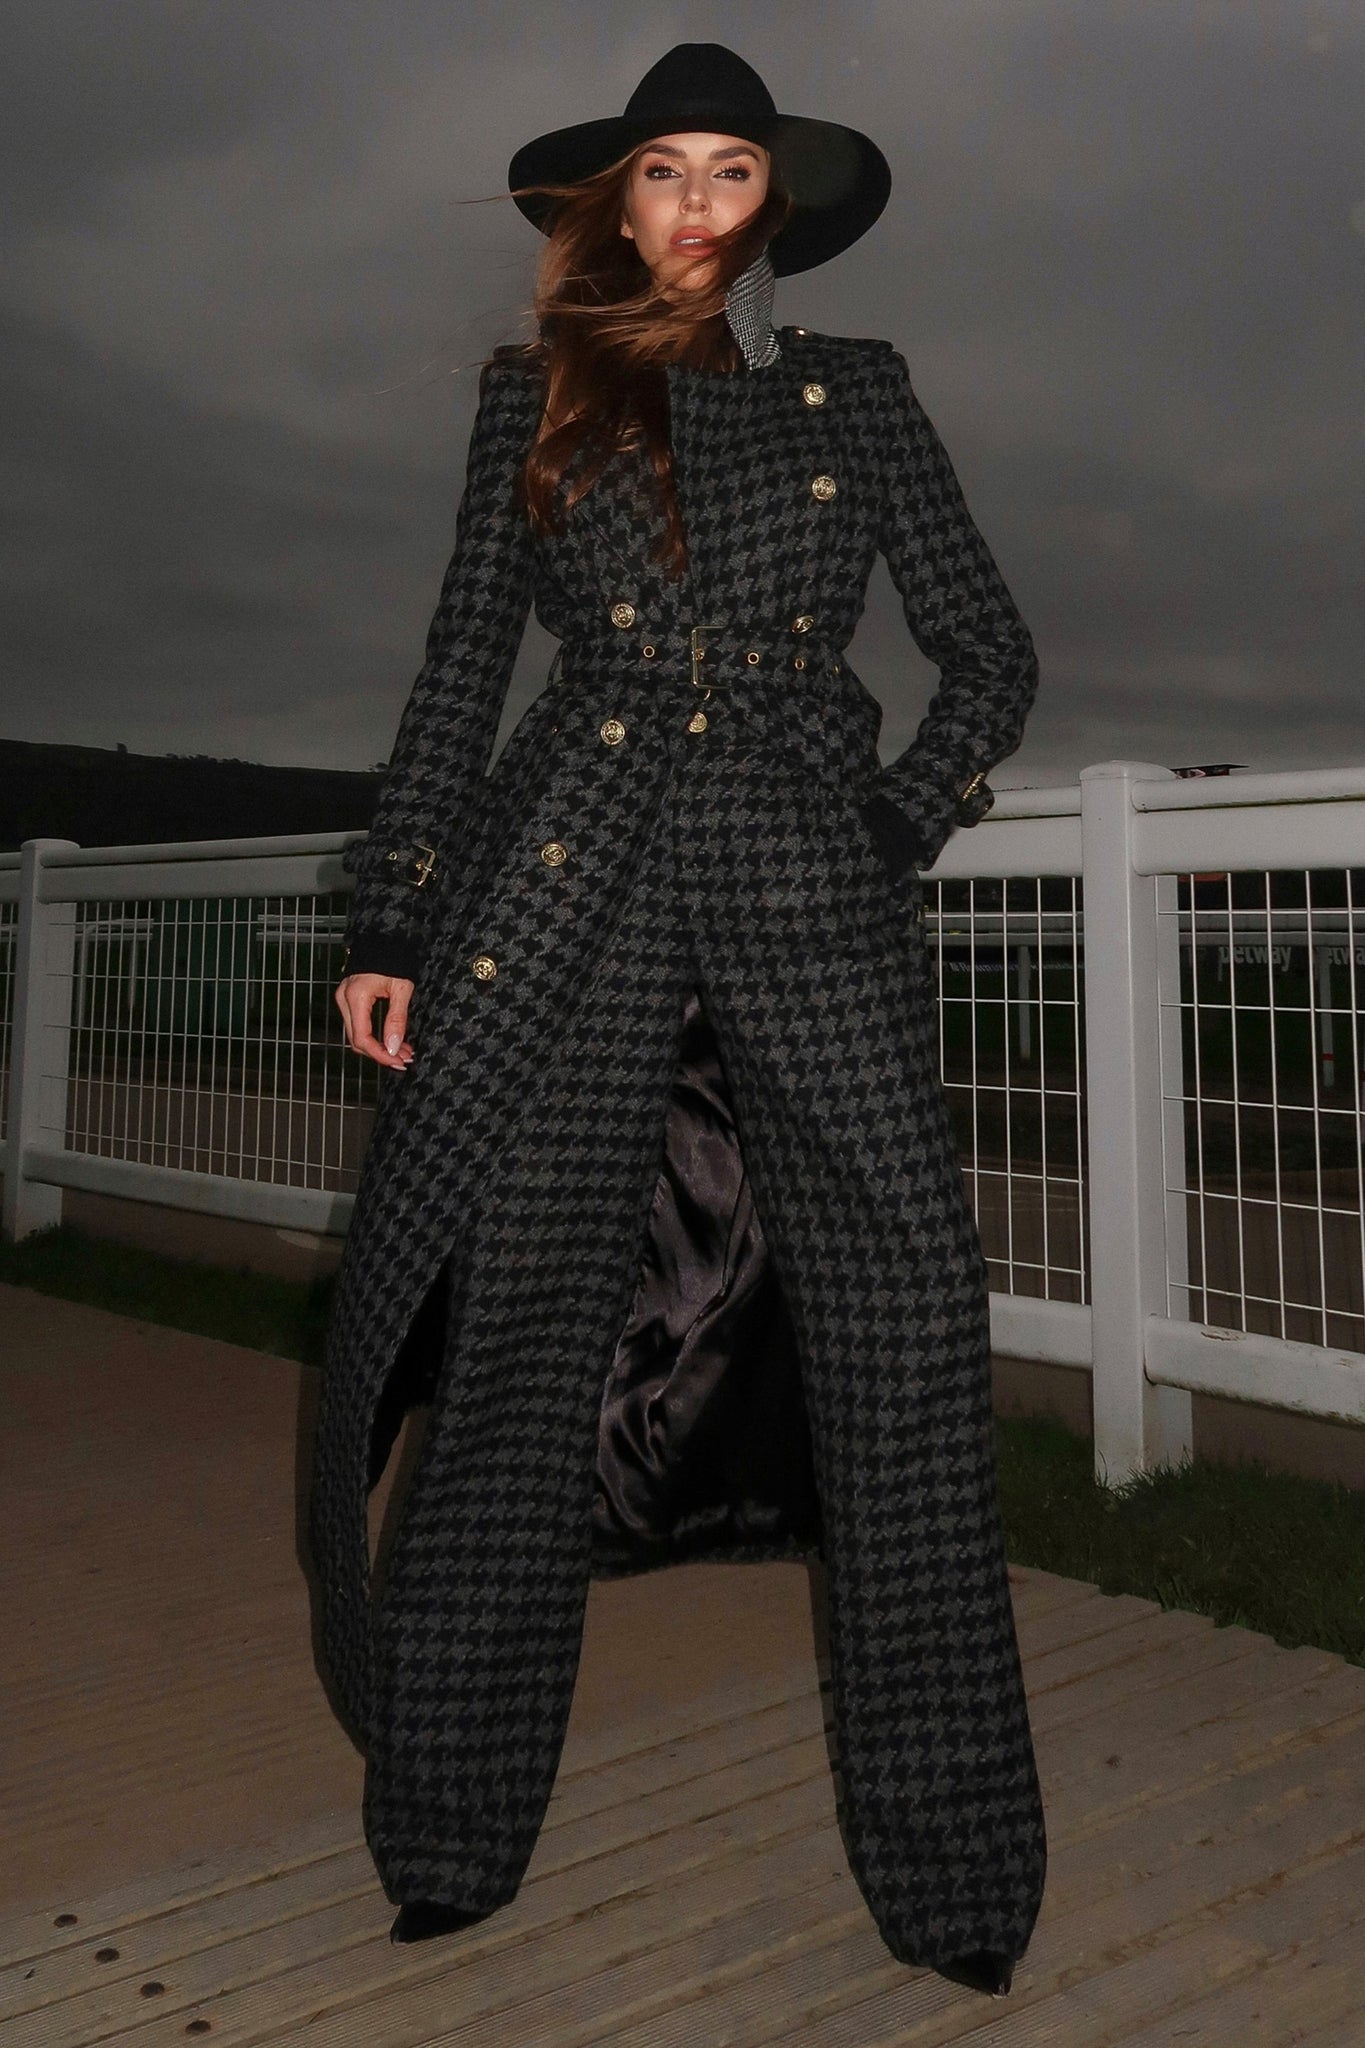 The Charcoal Houndstooth Look (Laura Blair)